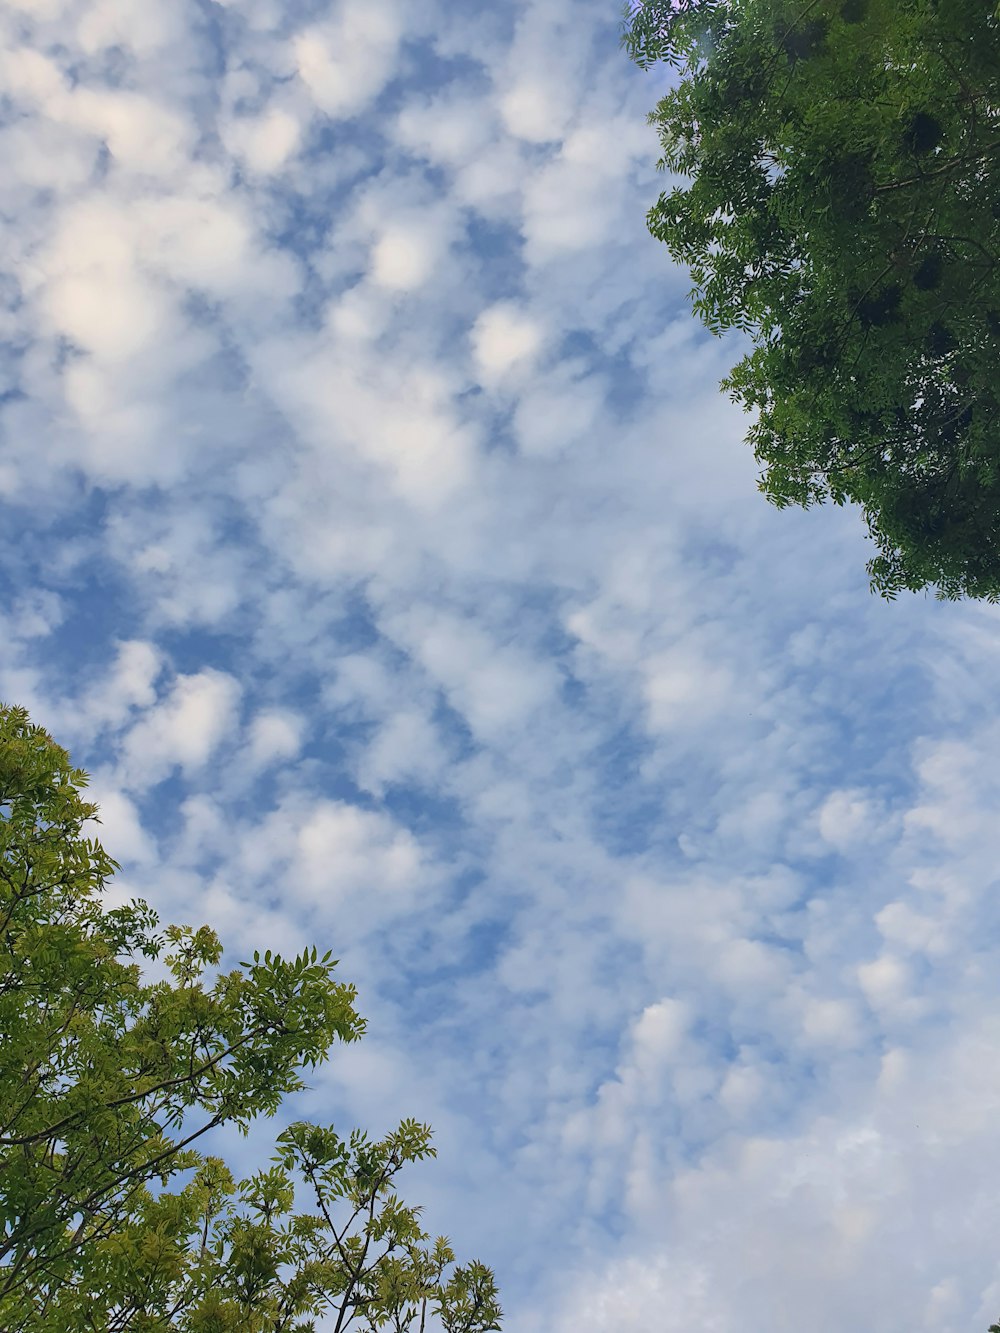 a blue sky with clouds and trees in the foreground